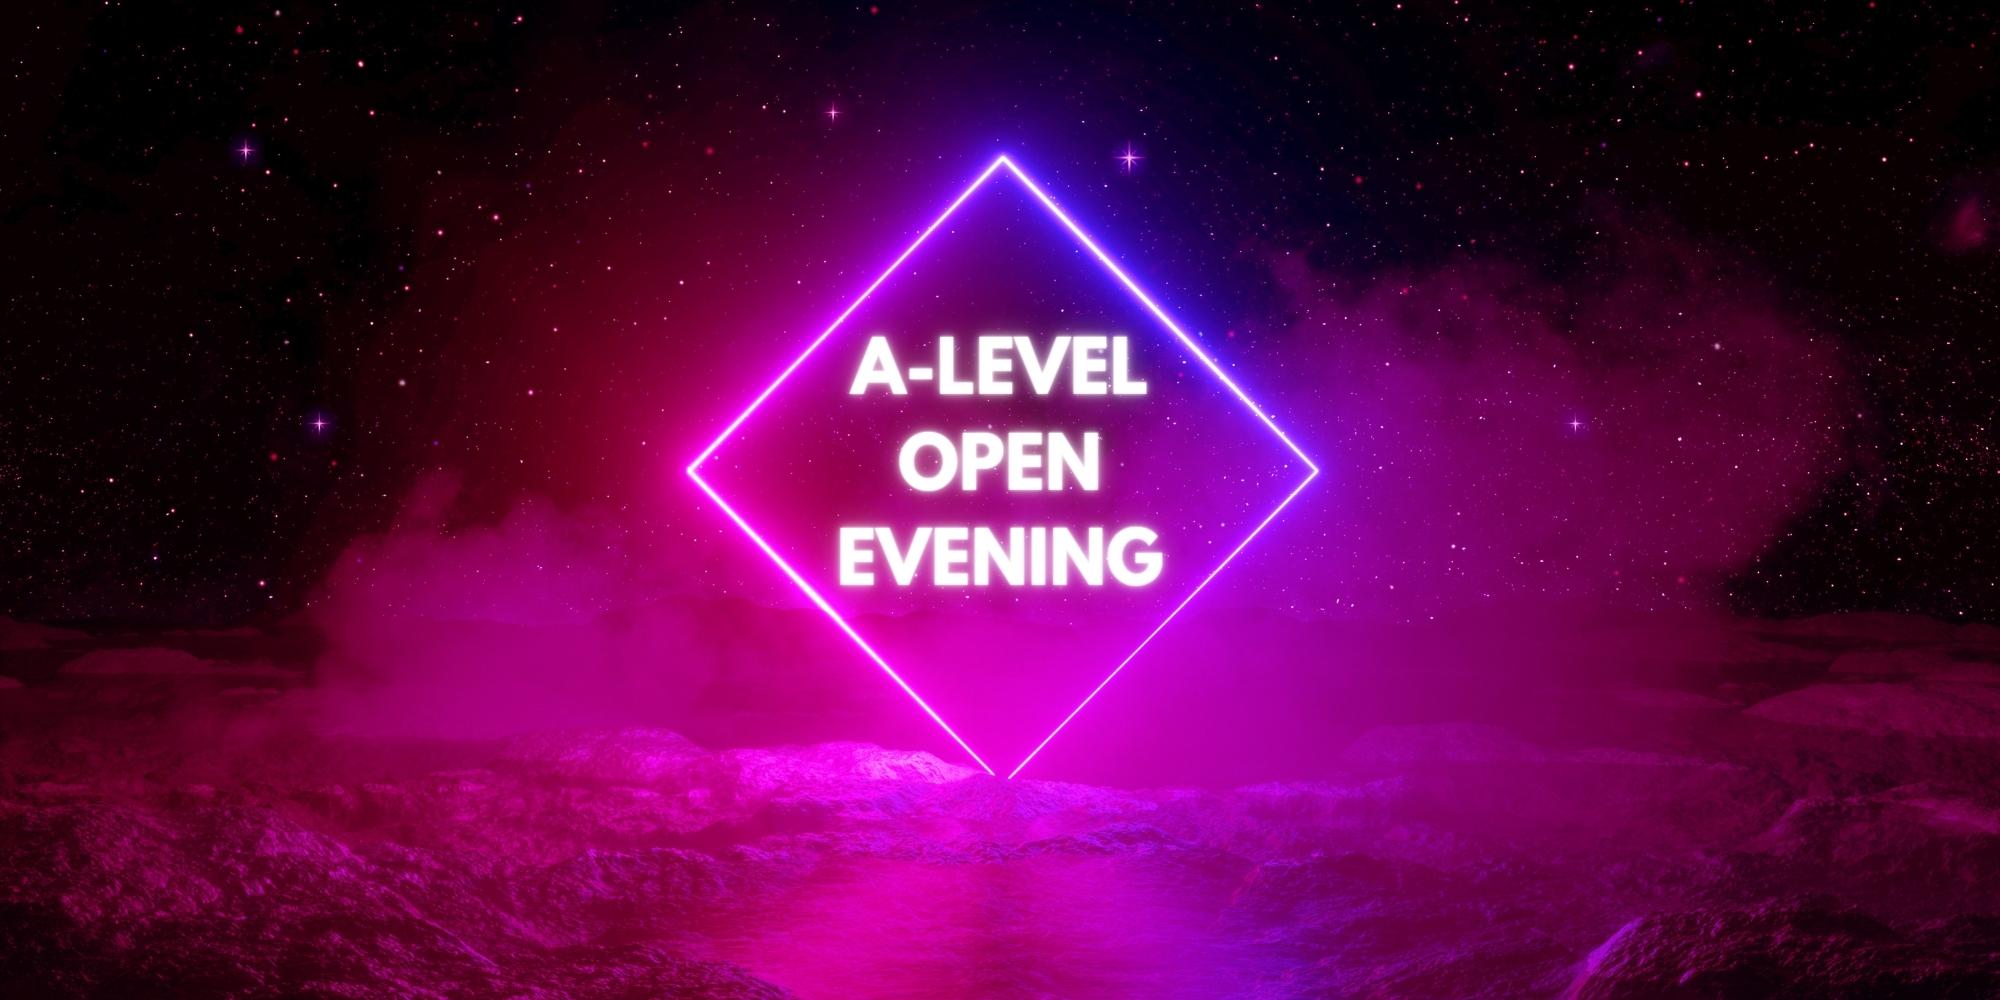 A-level Open Evening text on neon background.